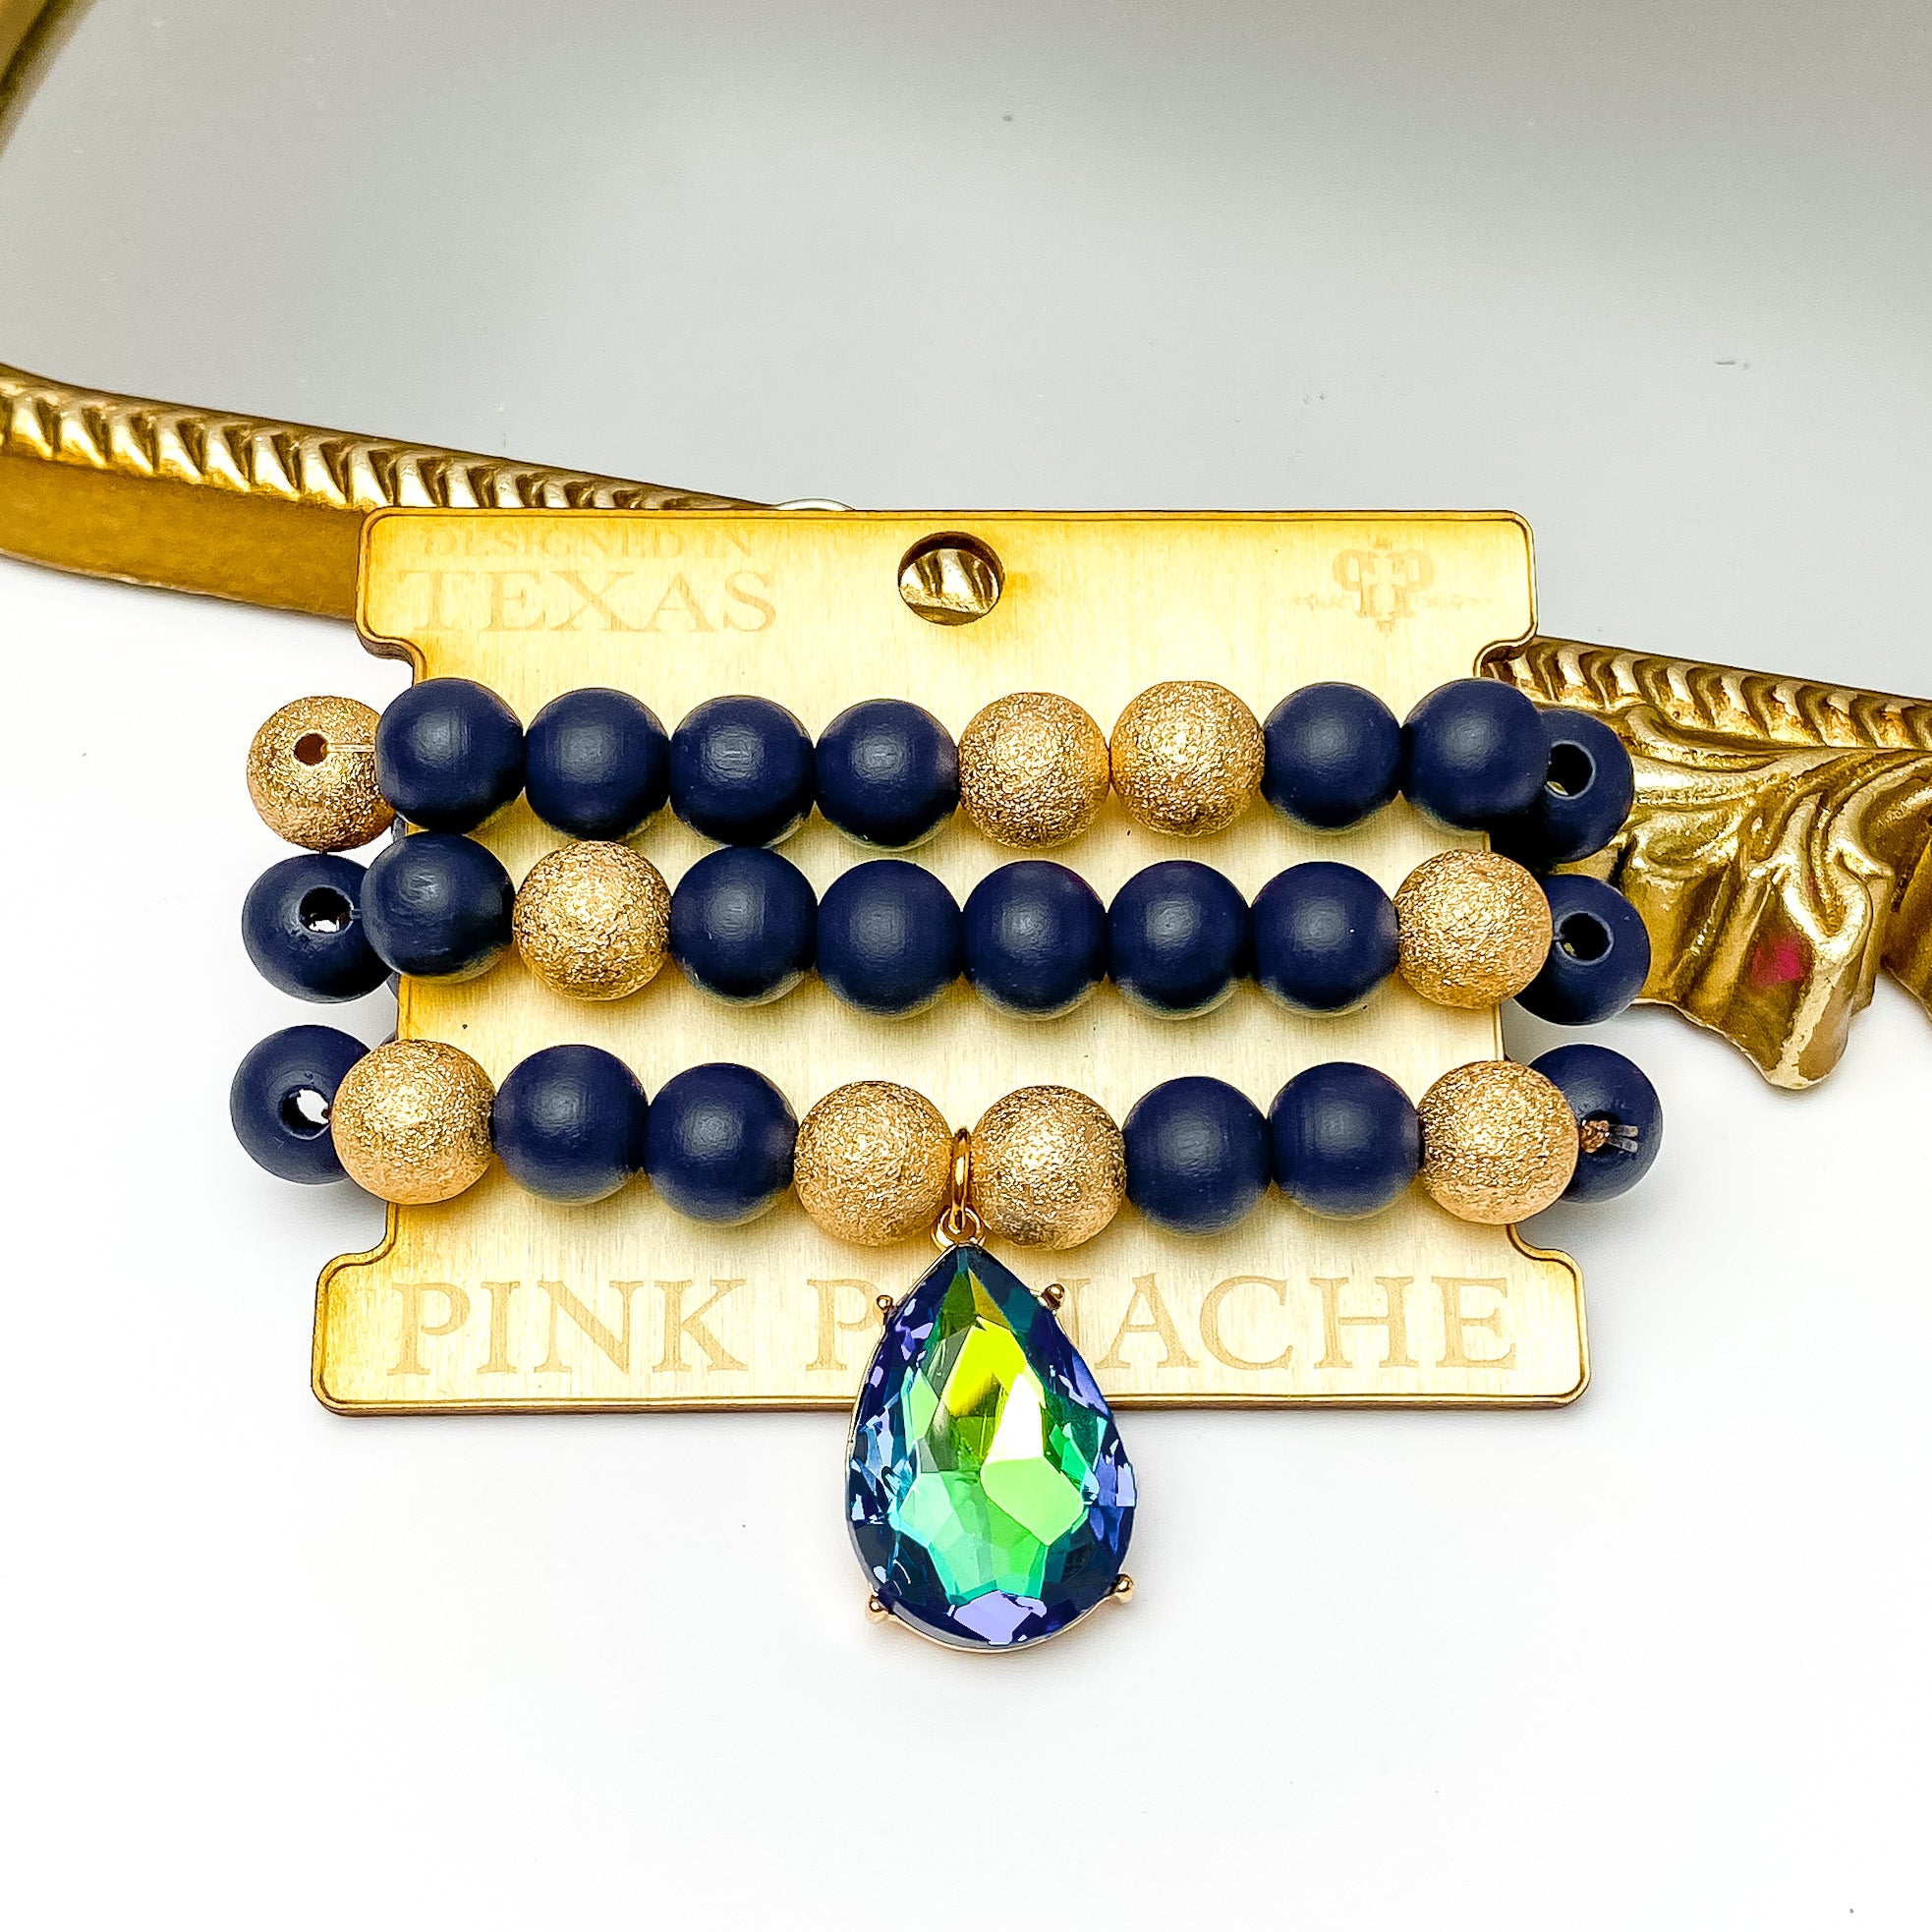 Pink Panache | Navy and Gold Tone Beaded Bracelet Set with Large Black AB Crystal Teardrop - Giddy Up Glamour Boutique